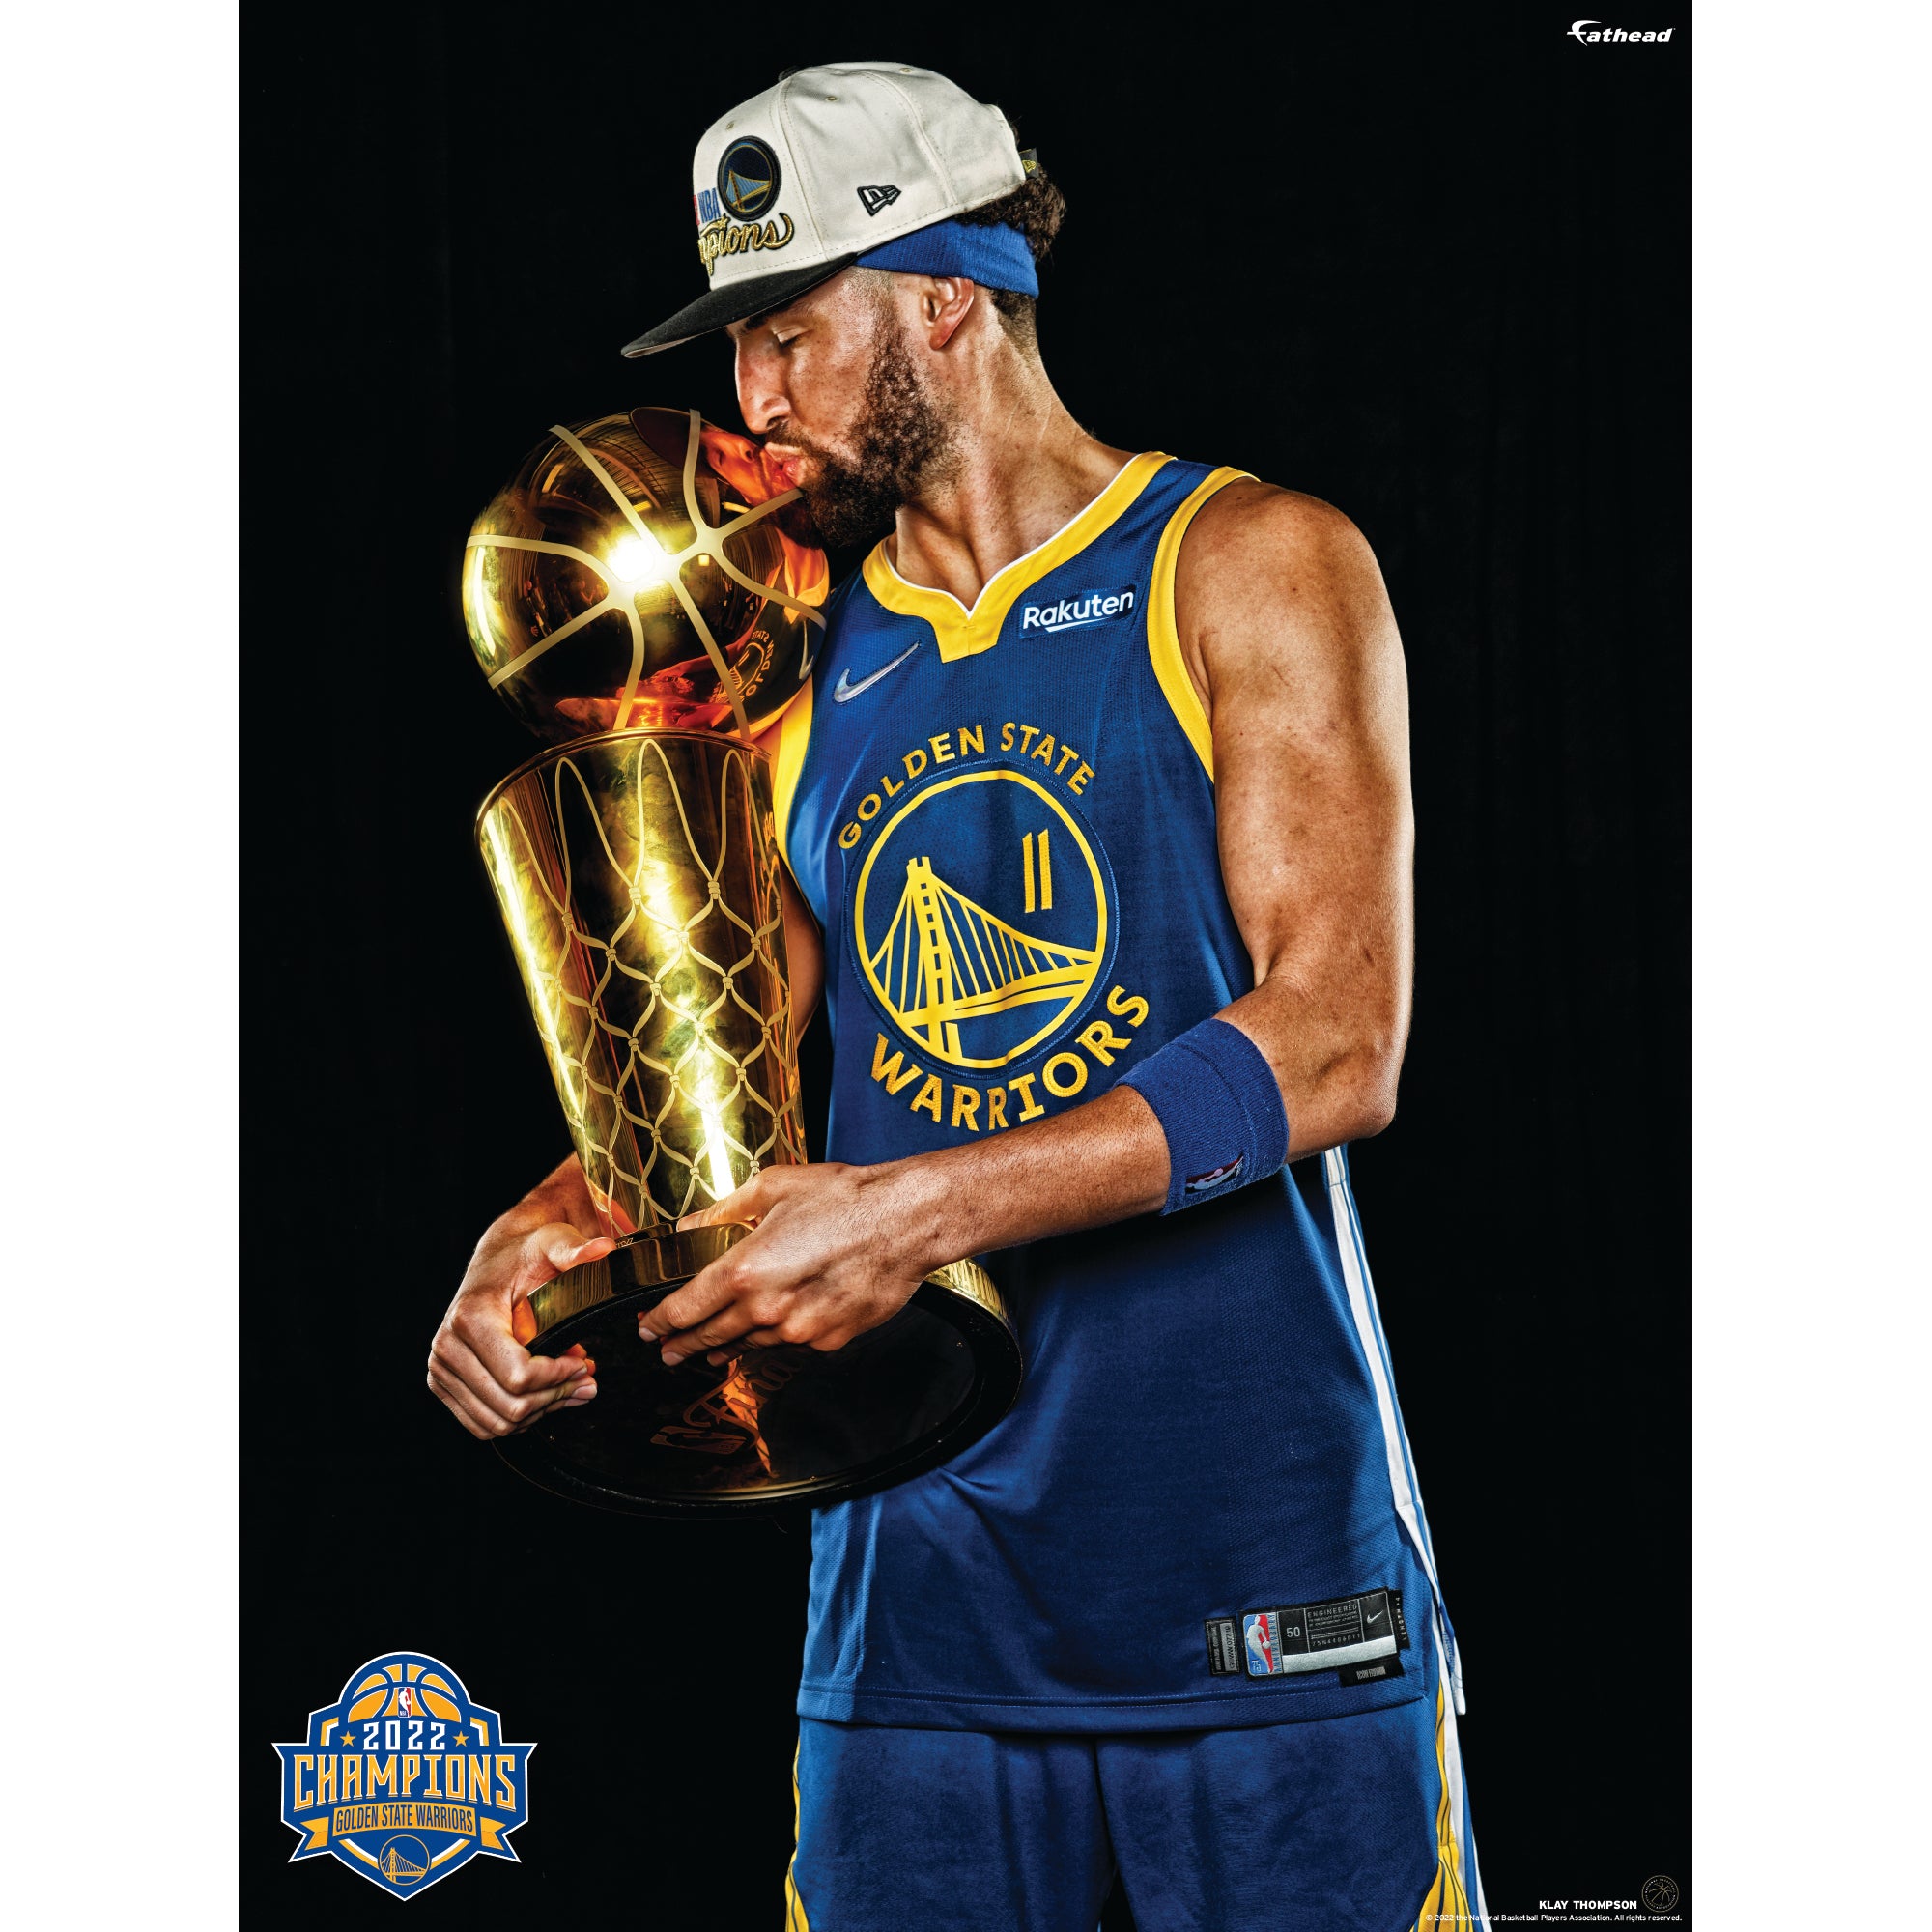 Warriors 2022 NBA Champions hats and shirts are already available